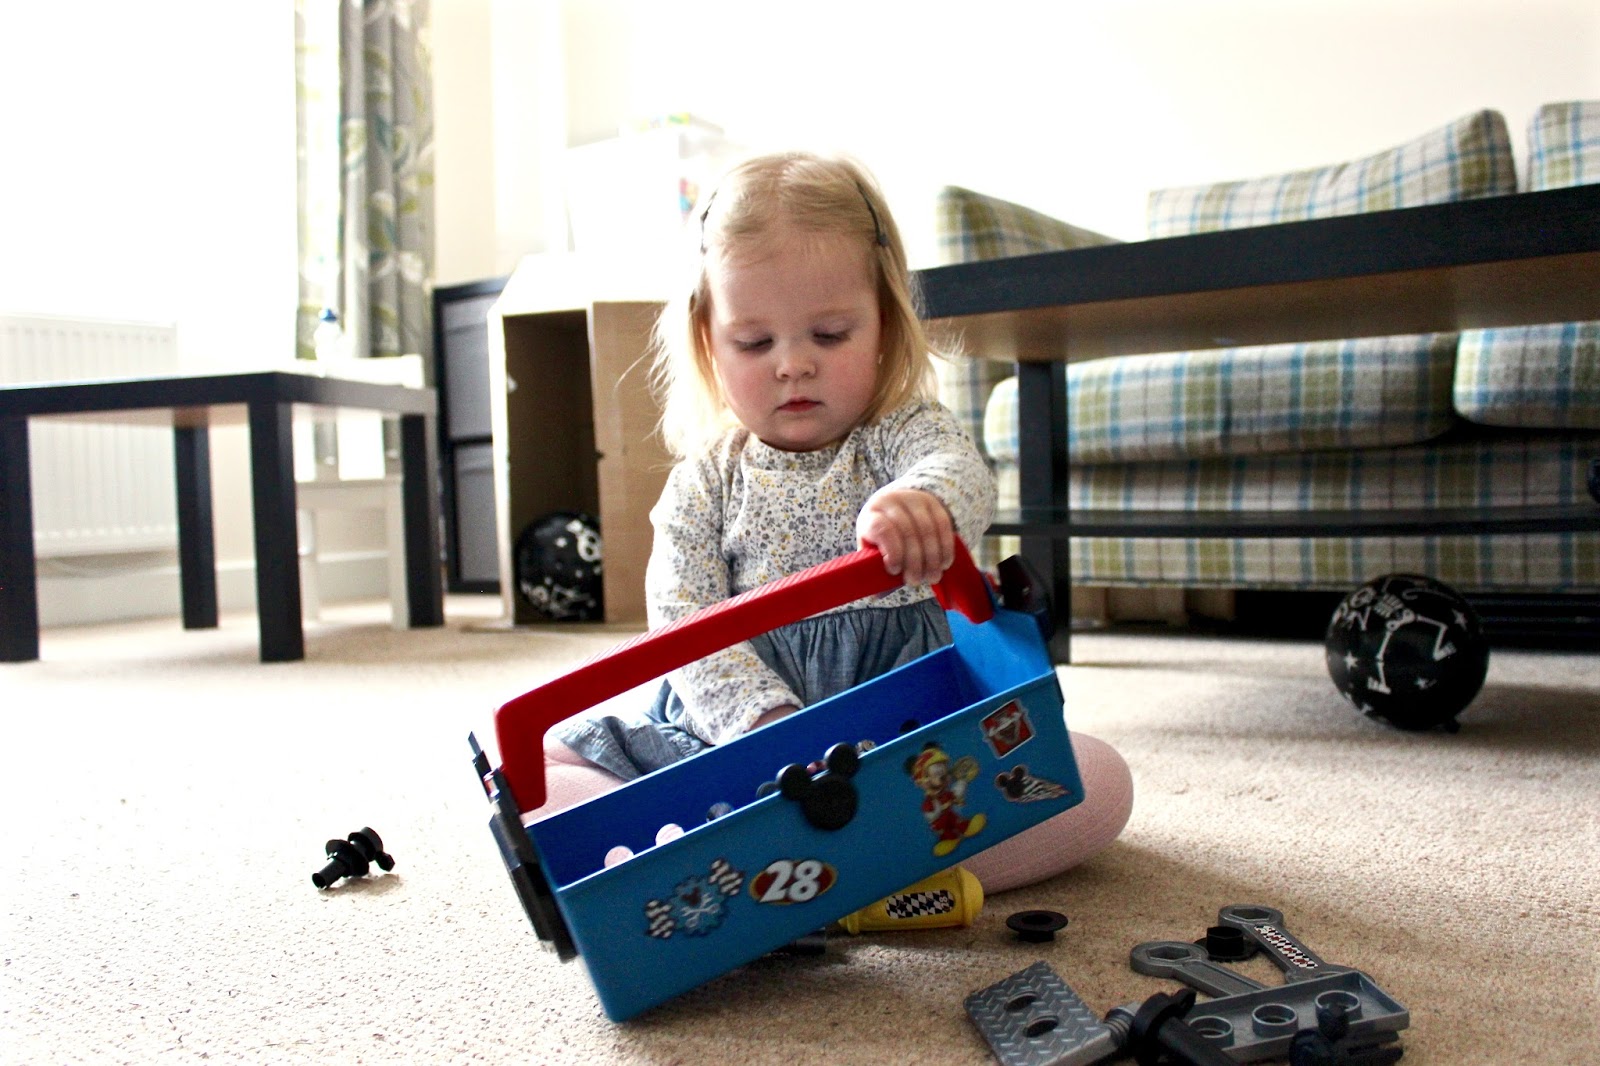 Elise (aged 2) is holding up the pit crew tool box and looking at the side of it whilst putting screws in the existing holes.